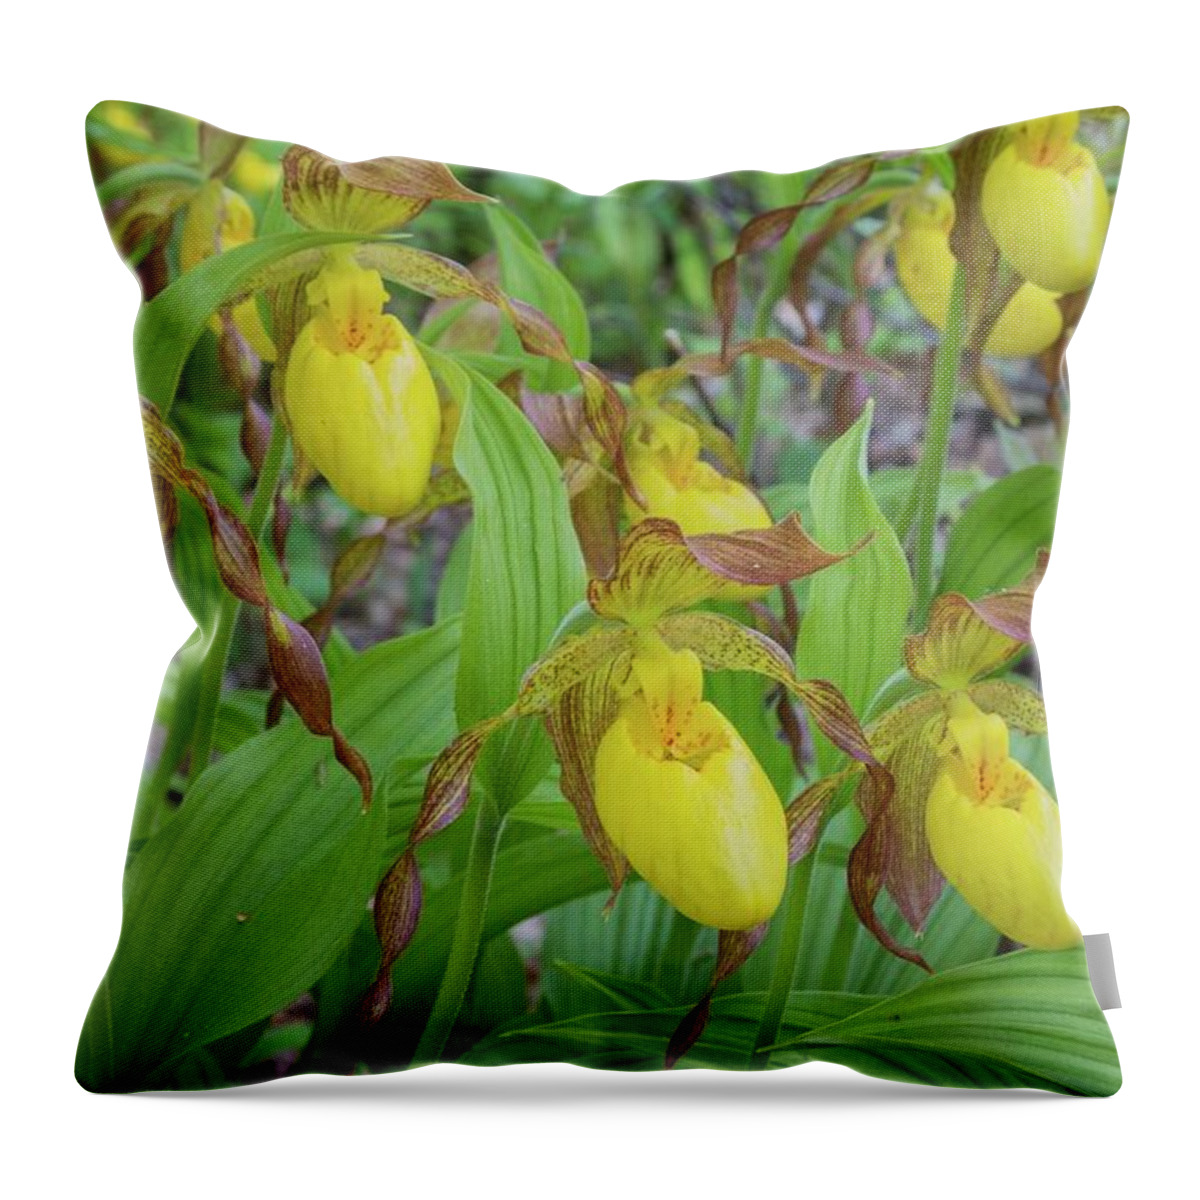 Door County Throw Pillow featuring the photograph Lady Slippers by Paul Schultz